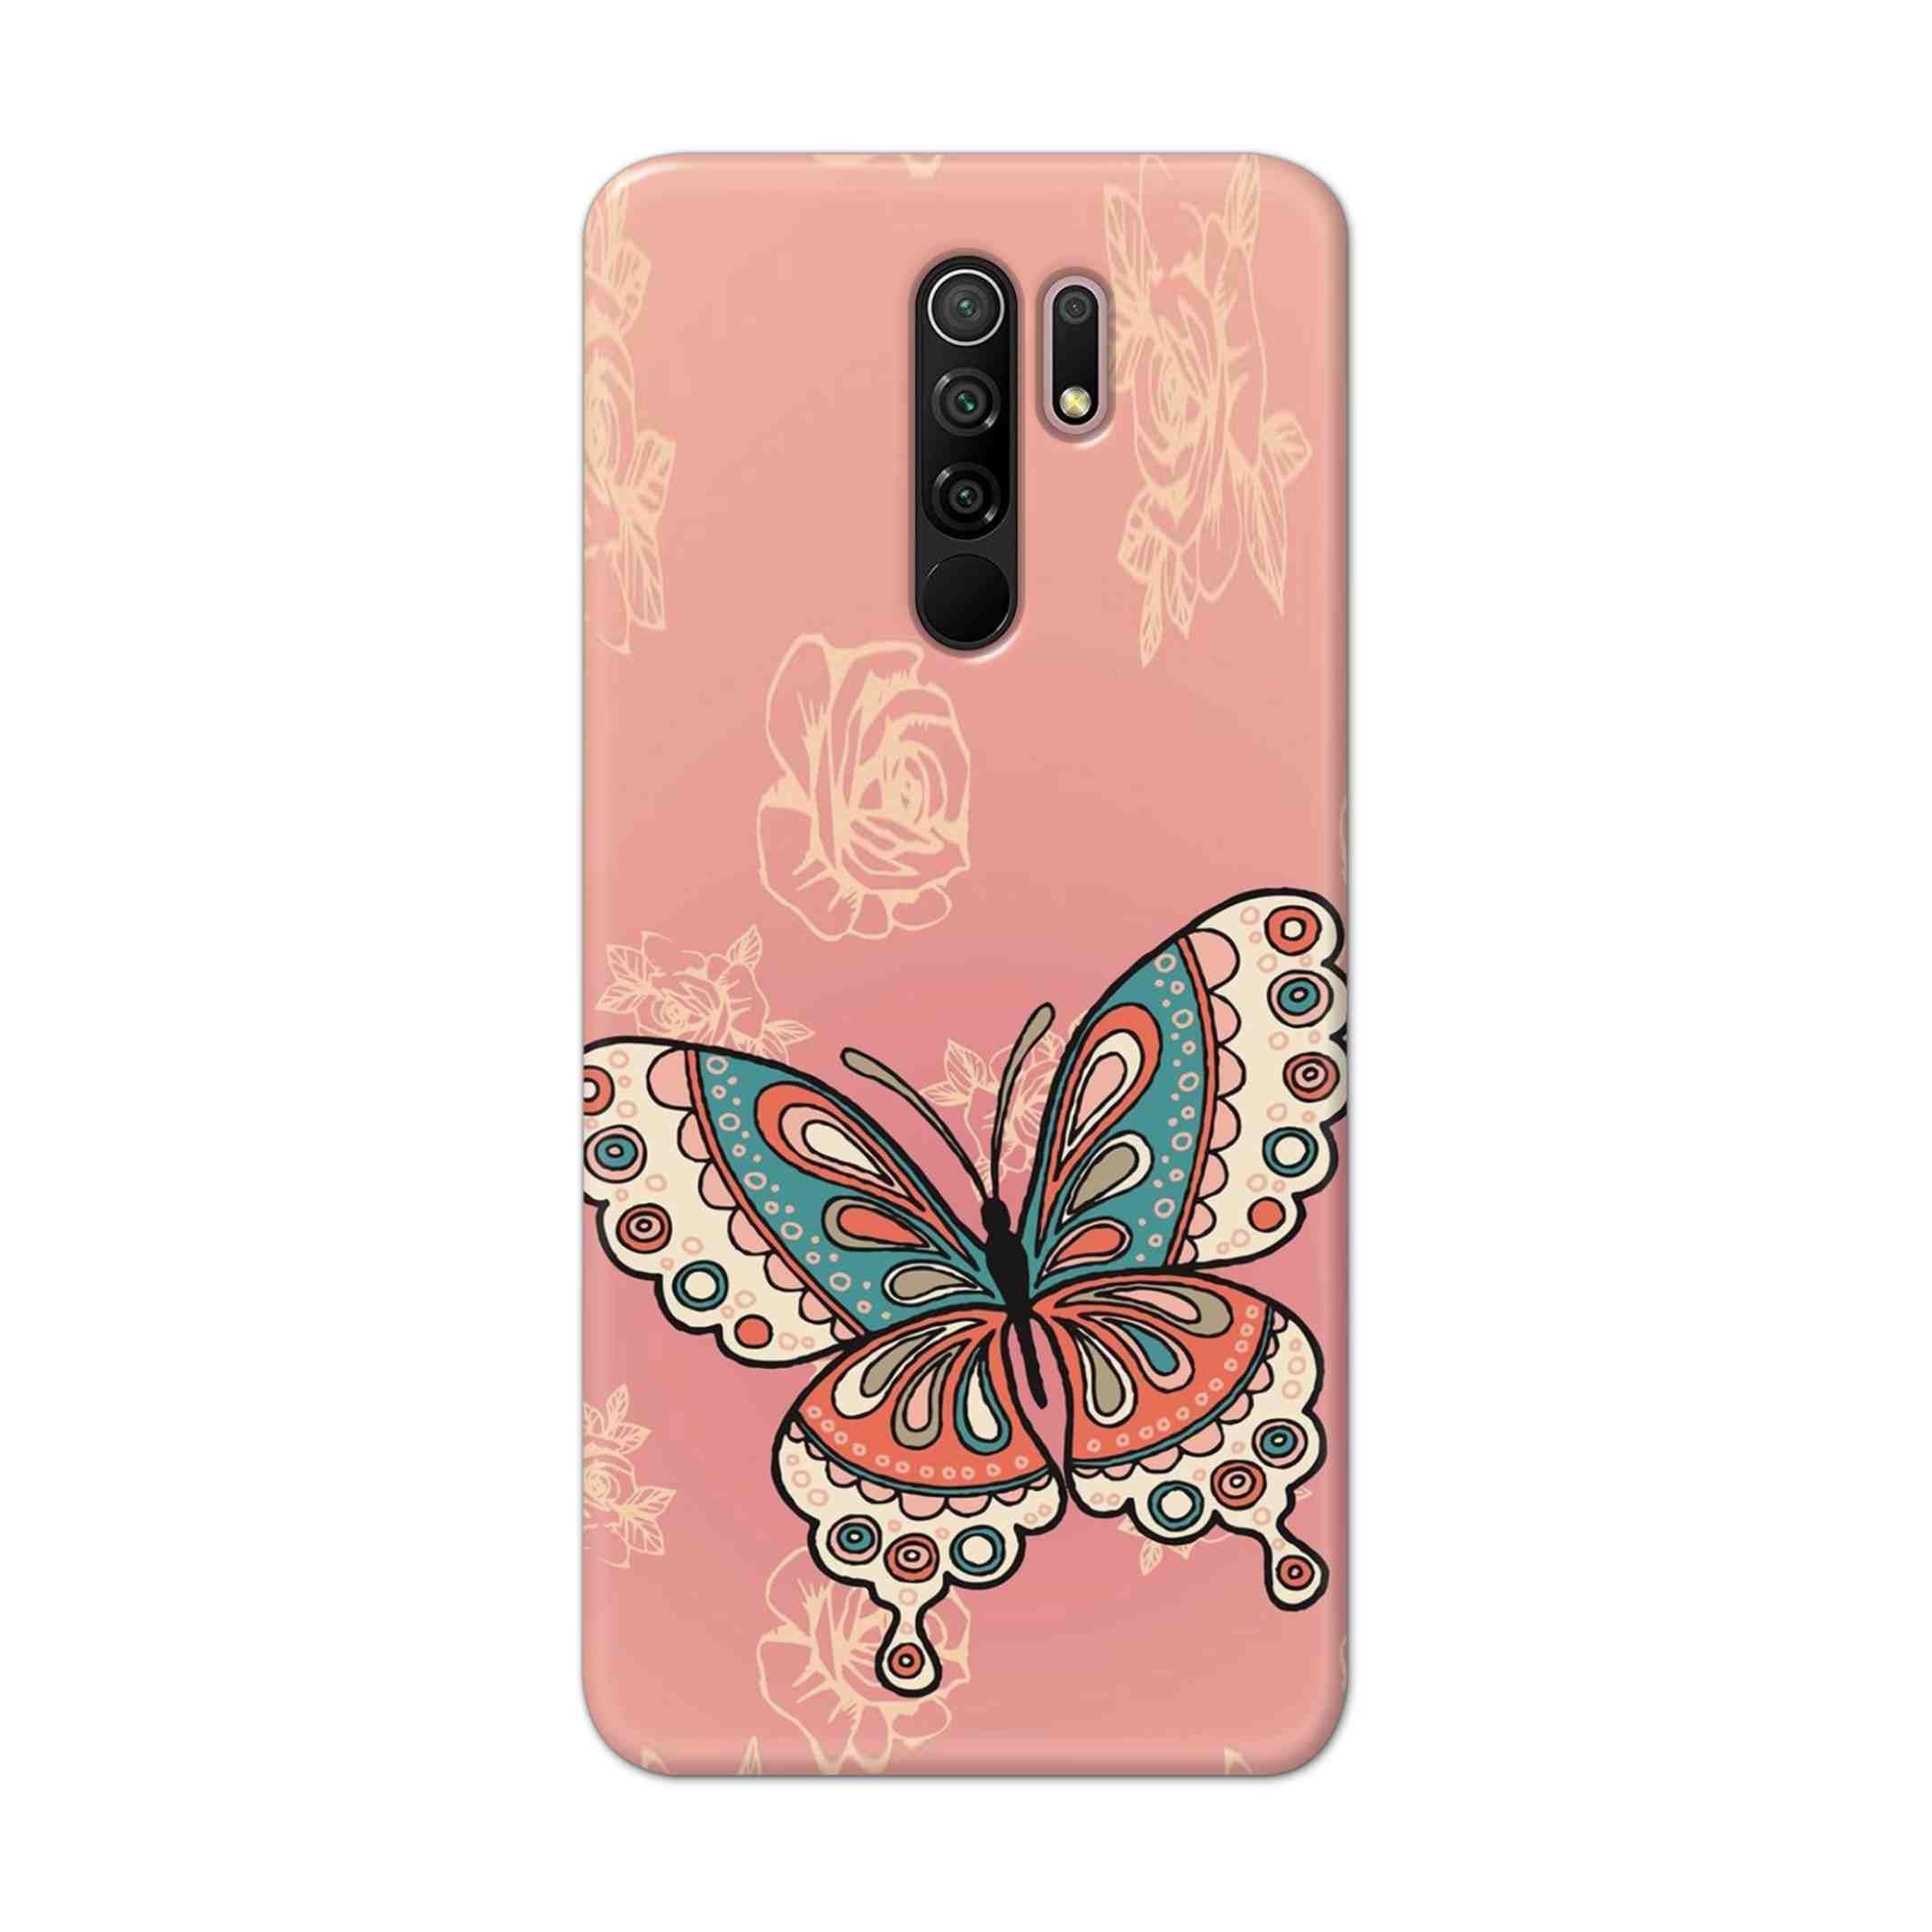 Buy Butterfly Hard Back Mobile Phone Case Cover For Xiaomi Redmi 9 Prime Online